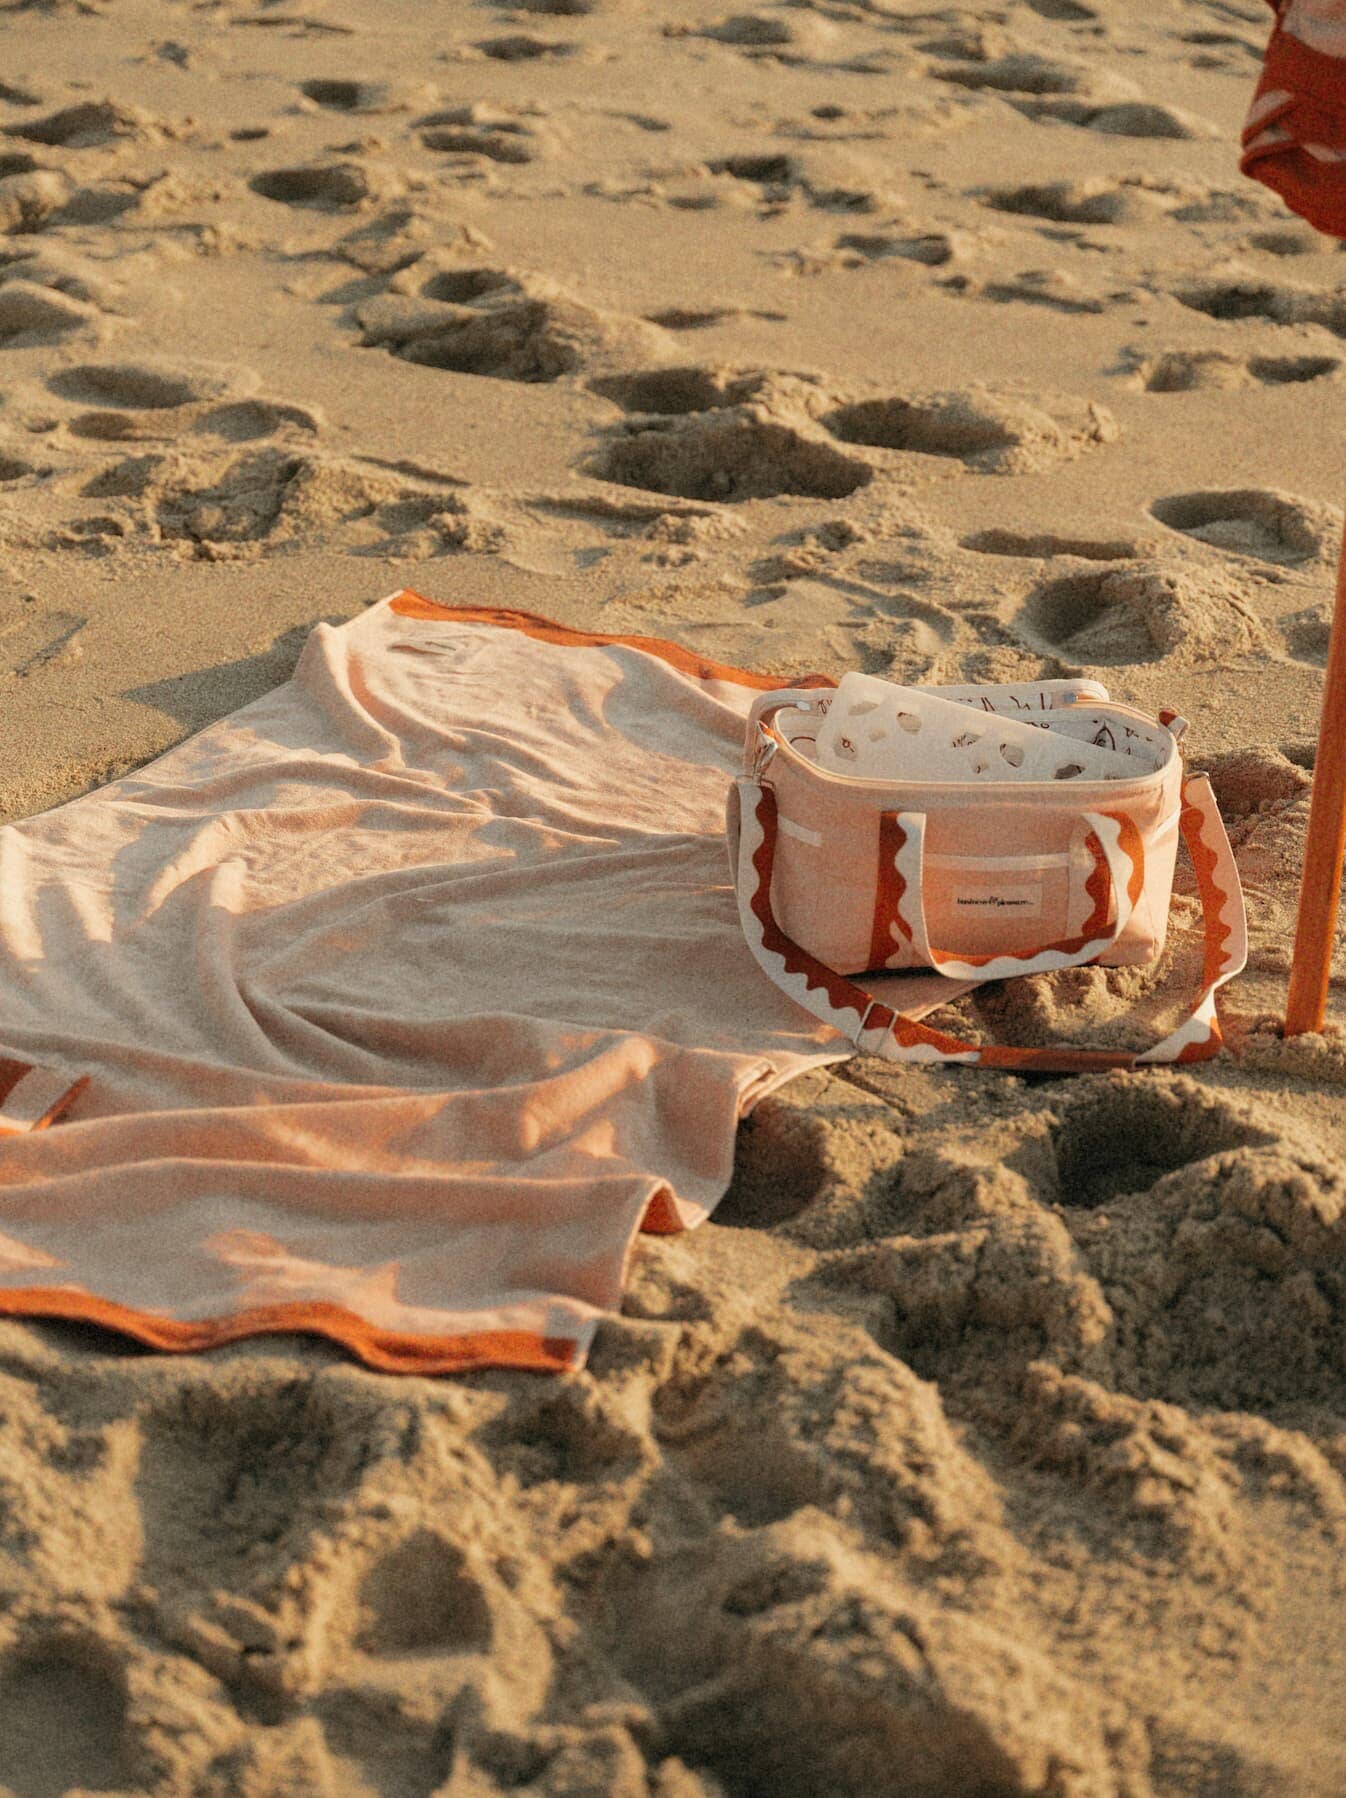 Riviera pink towel and cooler on the beach